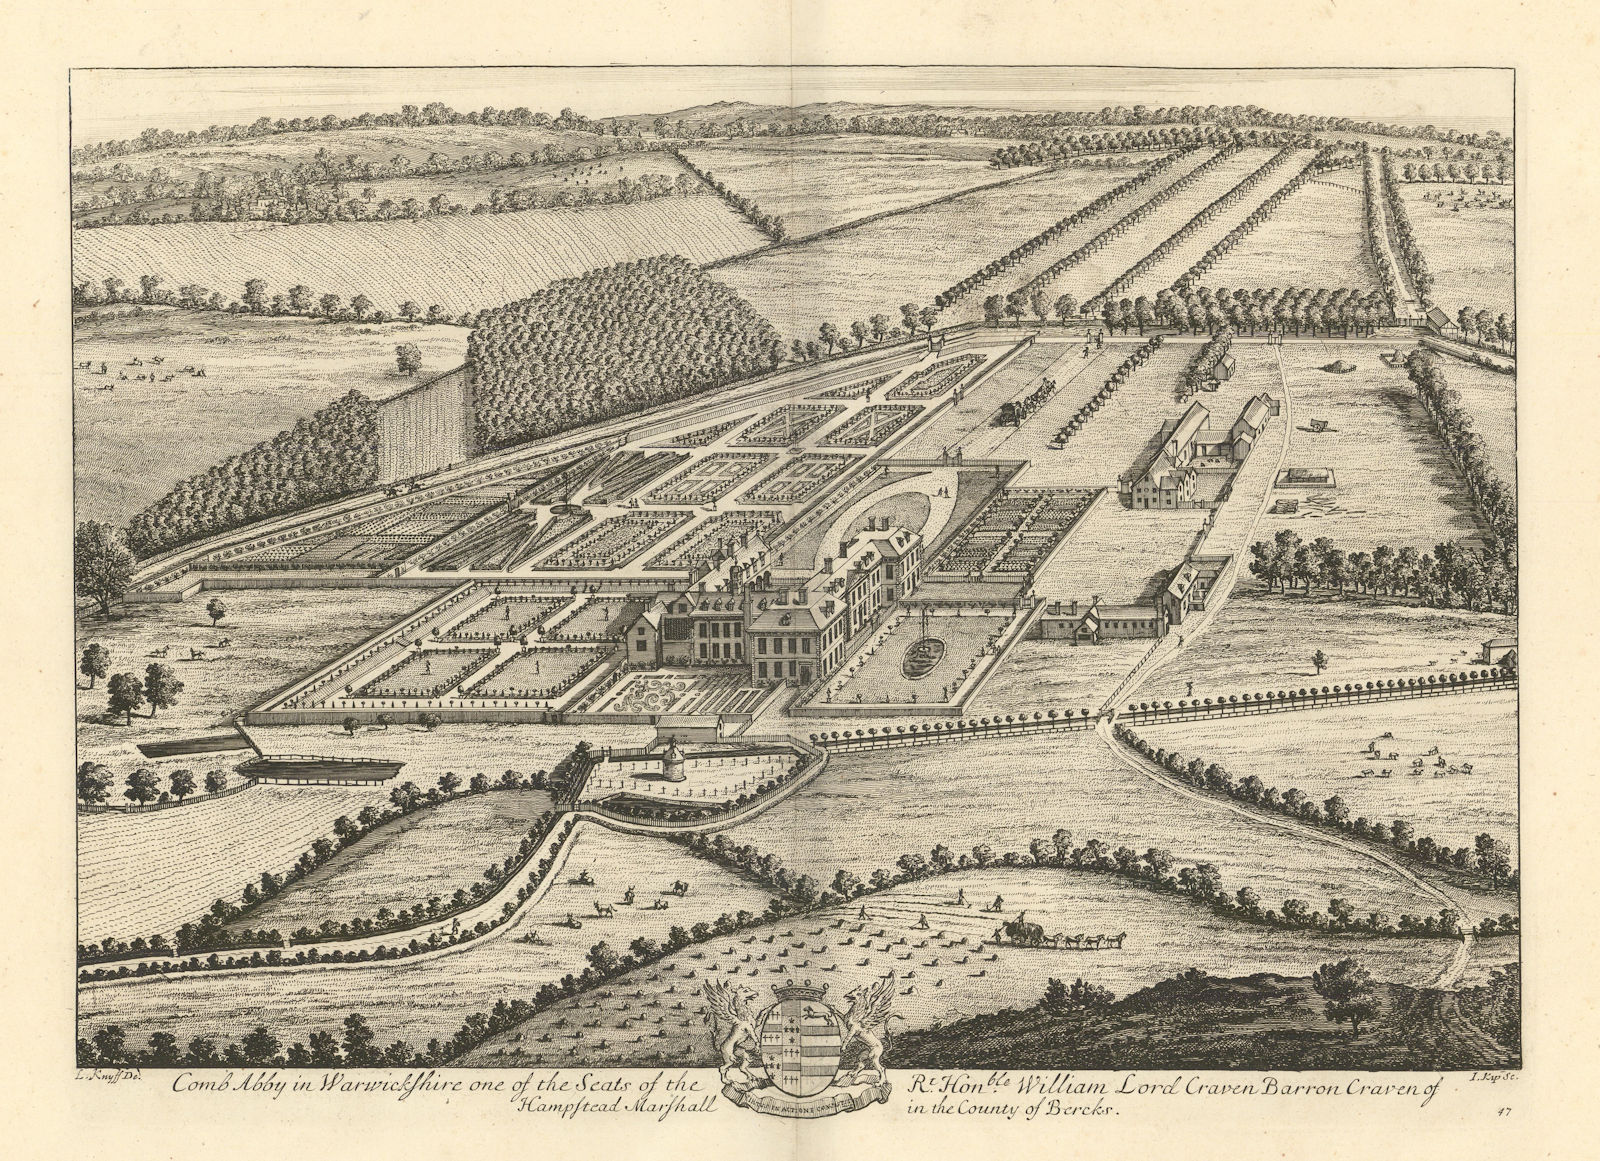 Coombe Abbey hotel, Coventry by Kip & Knyff. "Comb Abby in Warwickshire" 1709